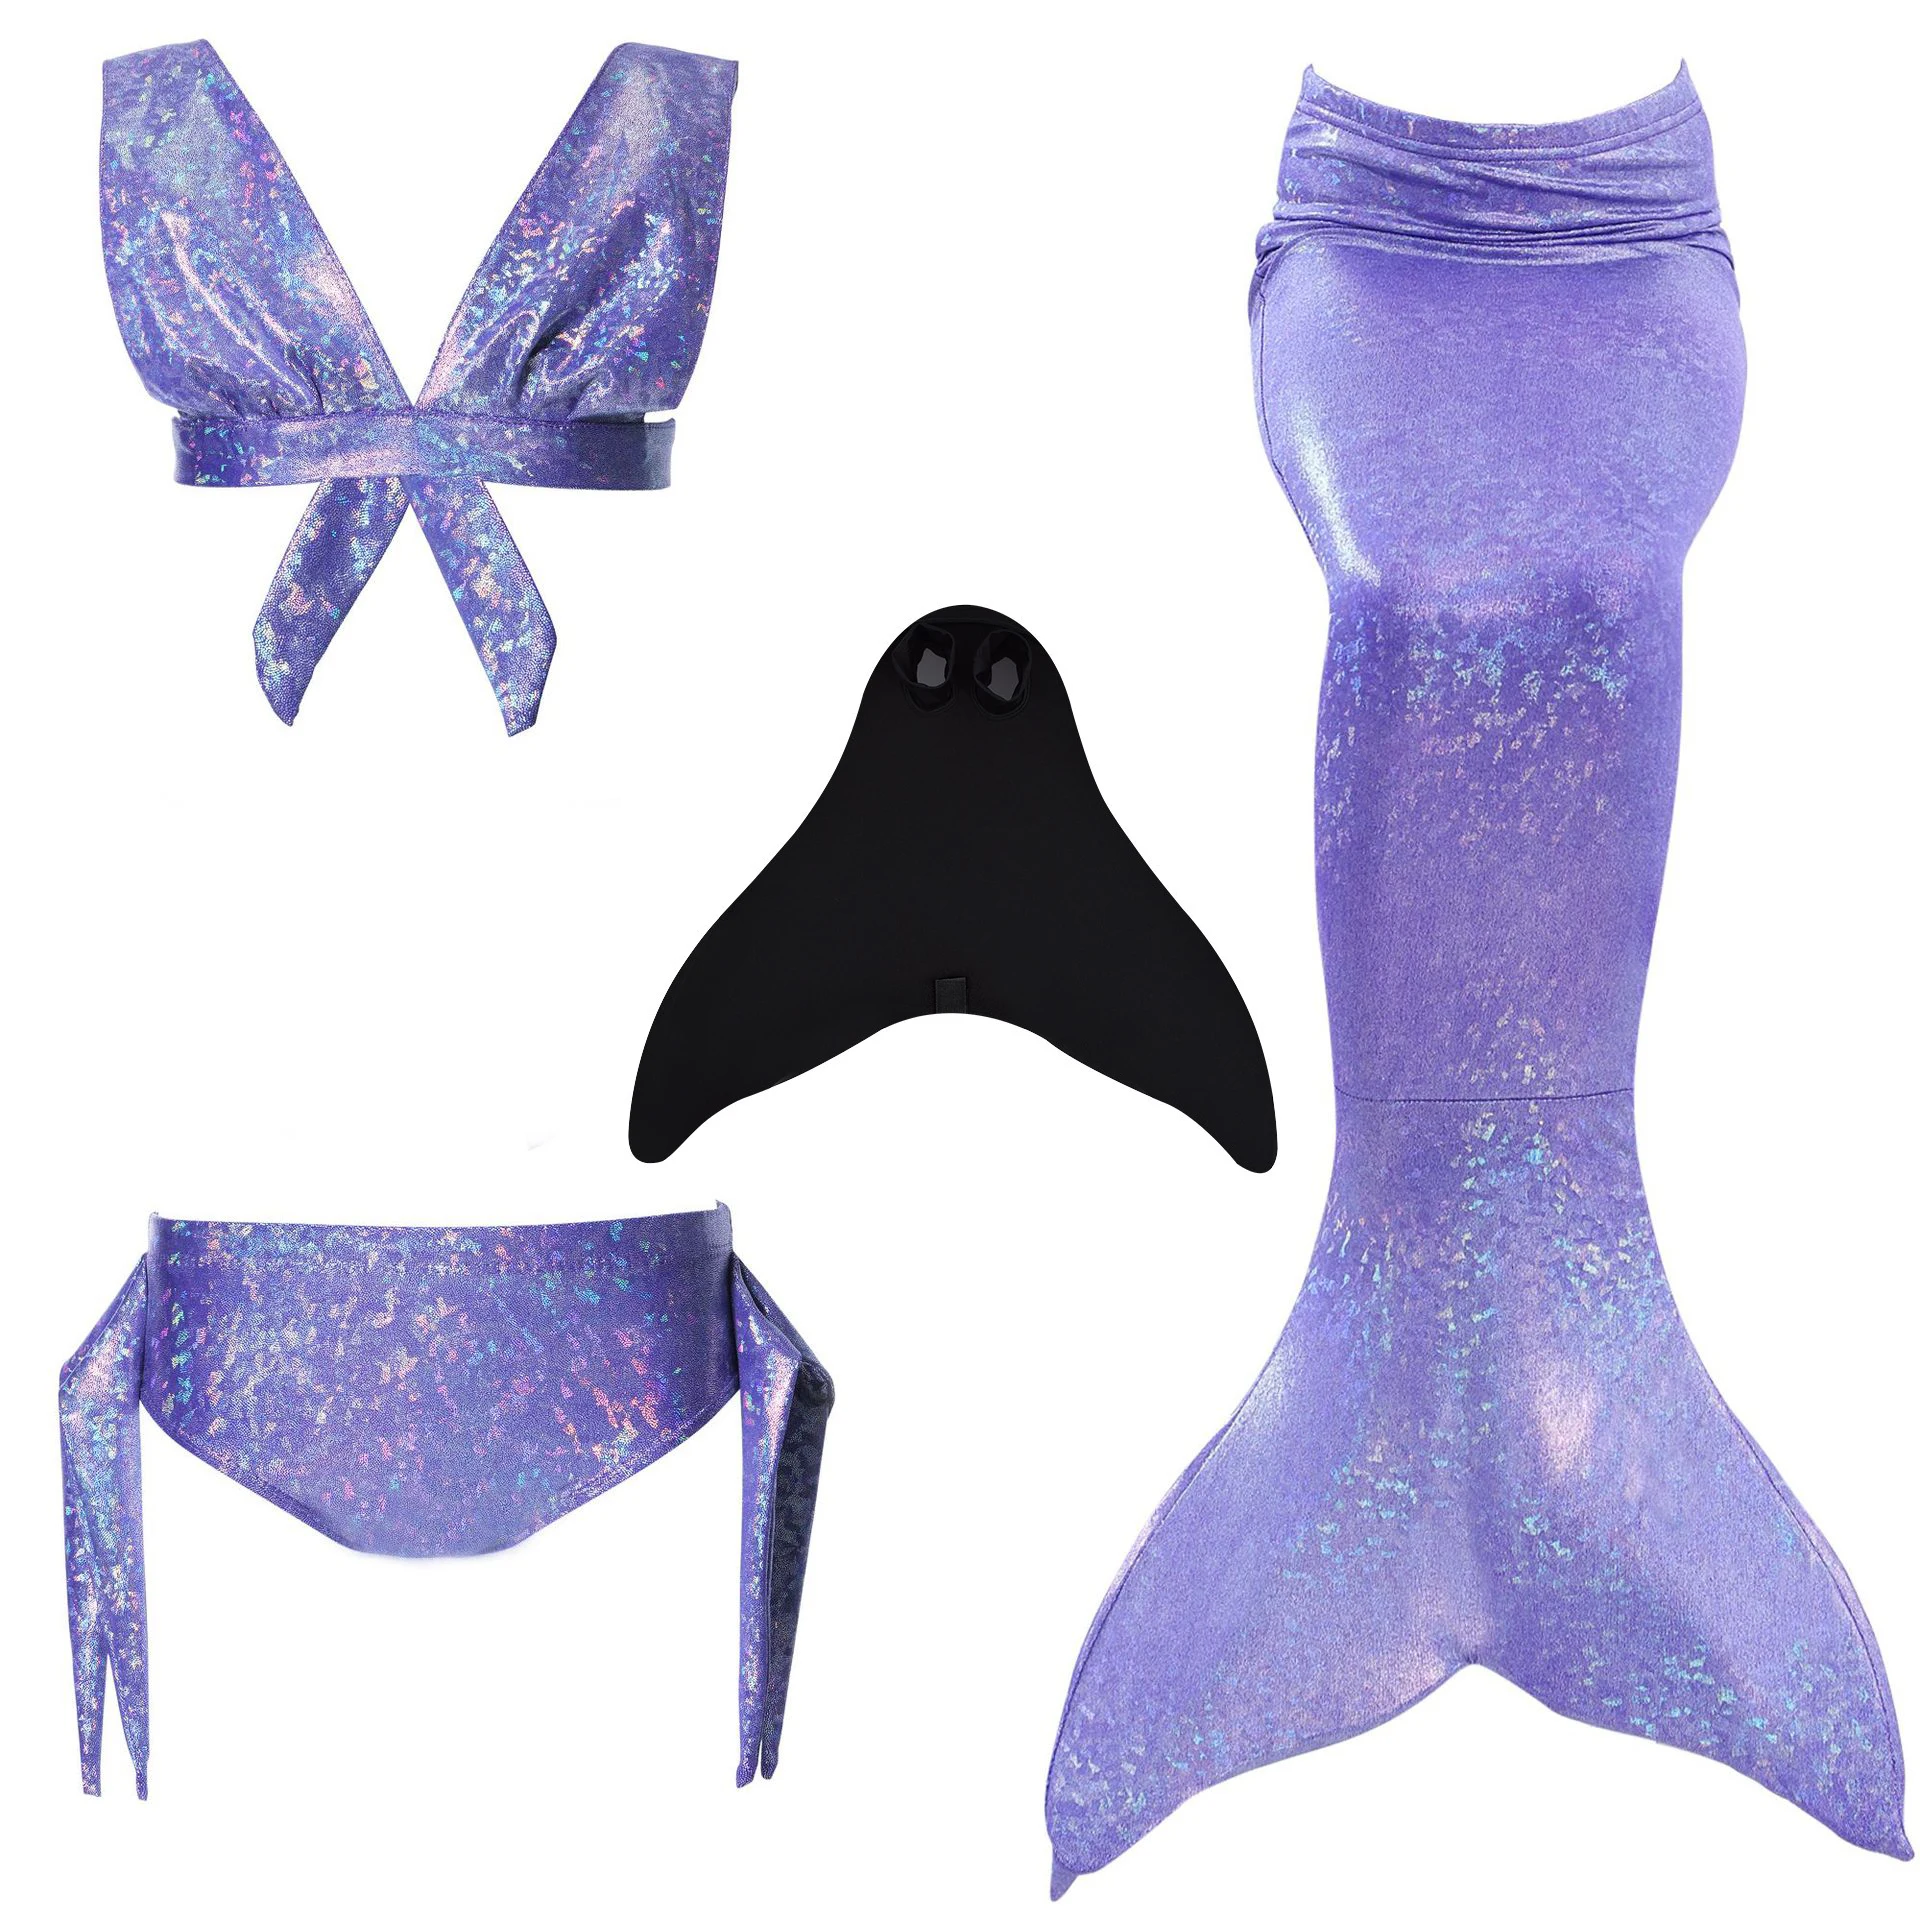 

2019 4pcs / set Hot Kids Girls Mermaid Tails With Fin Bathing Suit Bikini Swimsuit Dress For Girls With Flipper Monofin For Swim